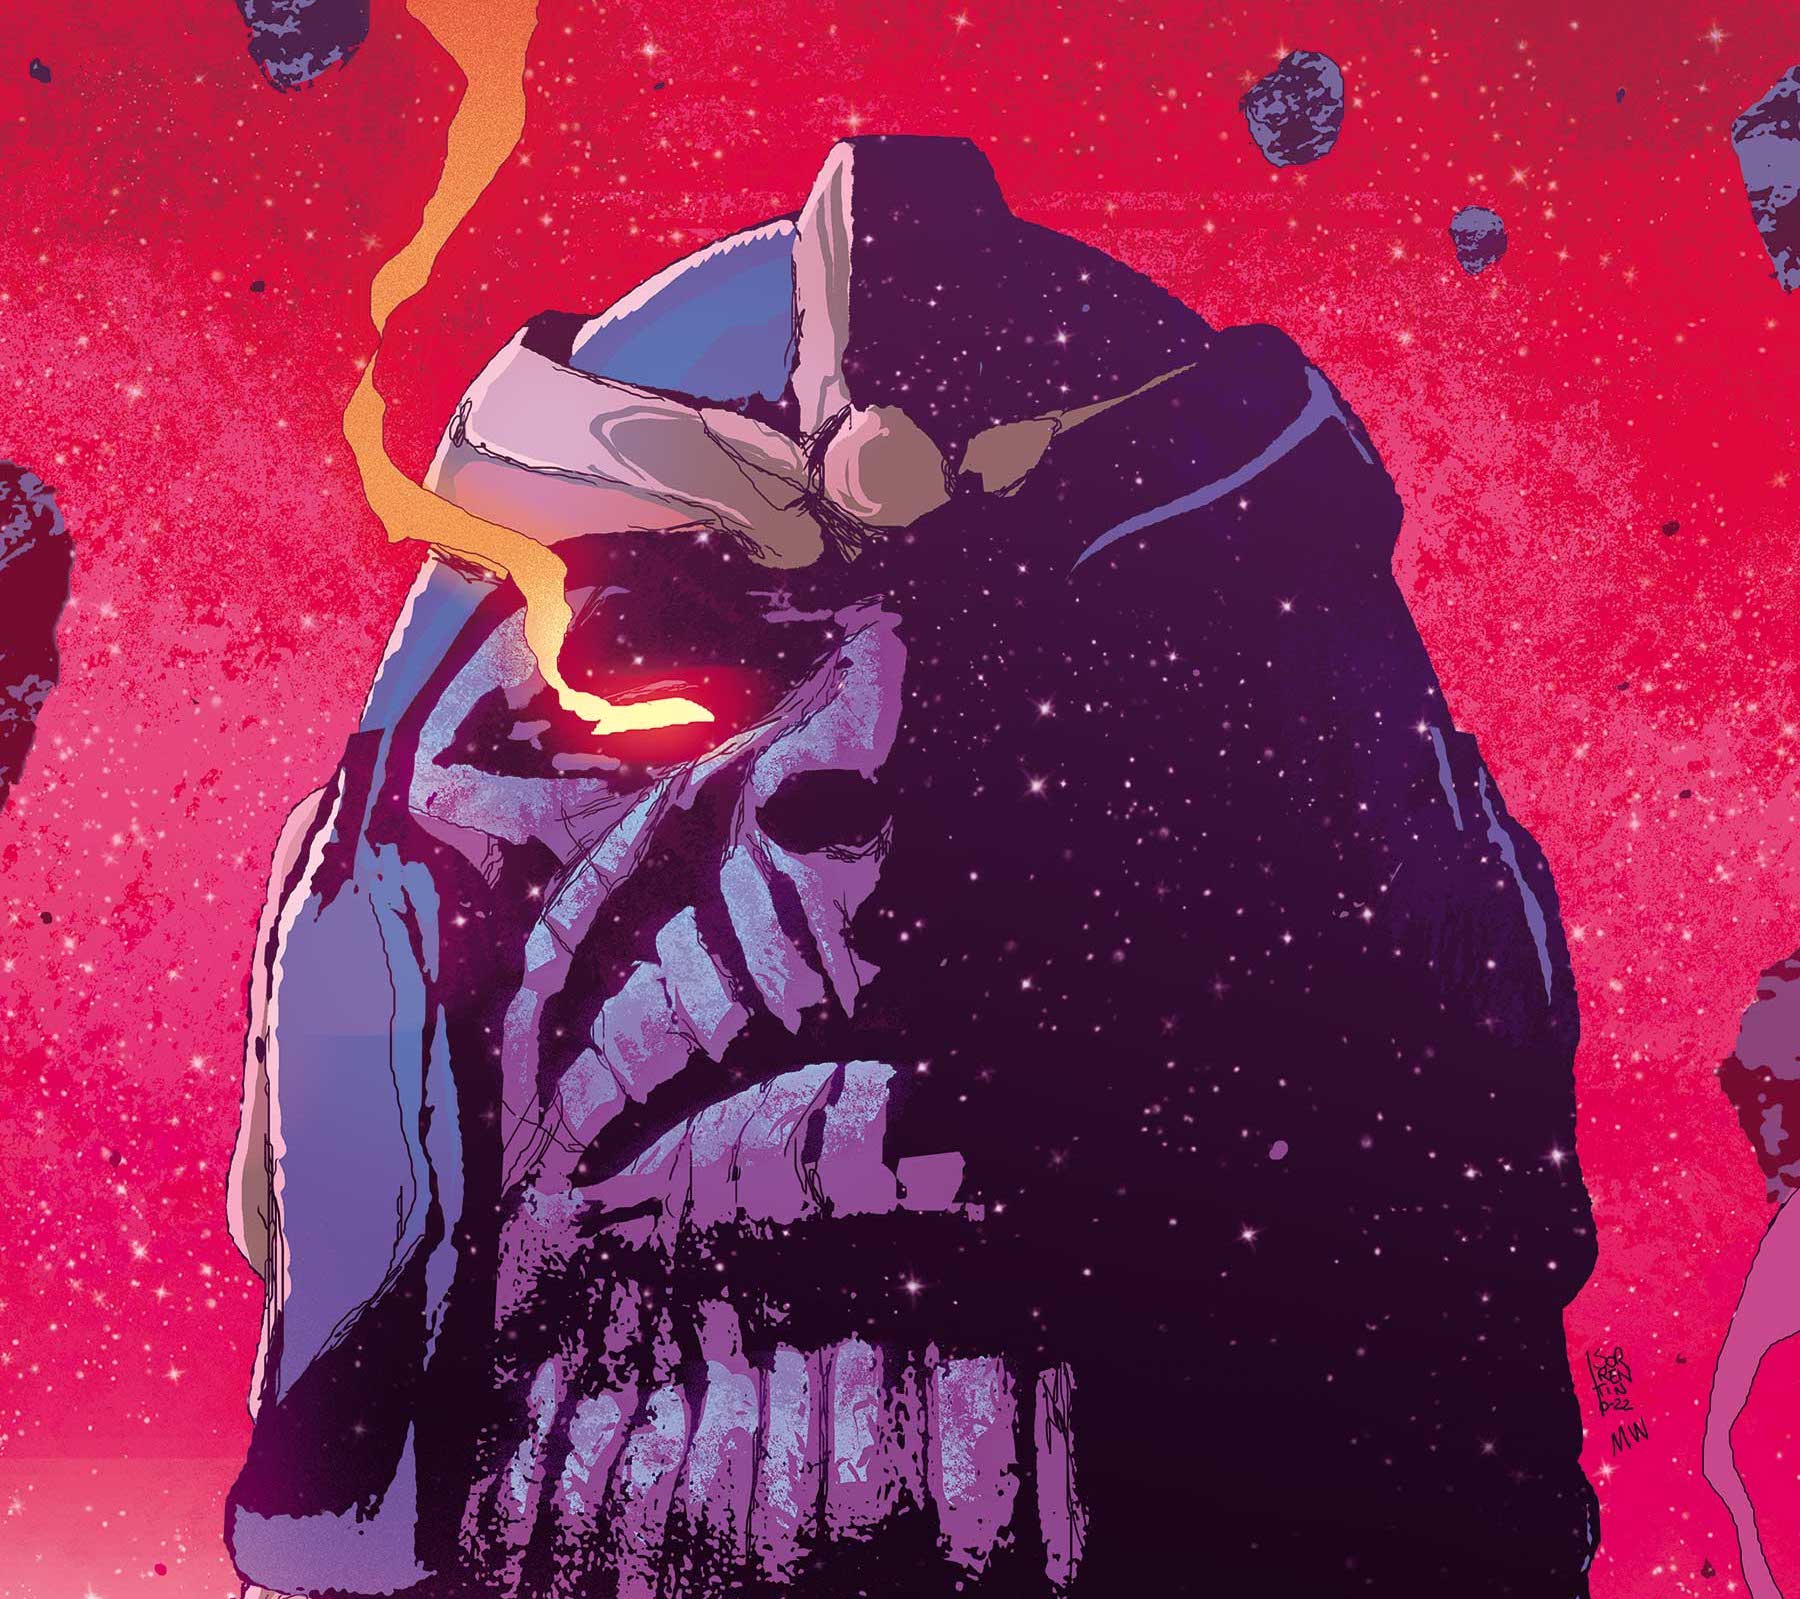 'Thanos: Death Notes' #1 shows why Thanos deserves to be on every best villain list